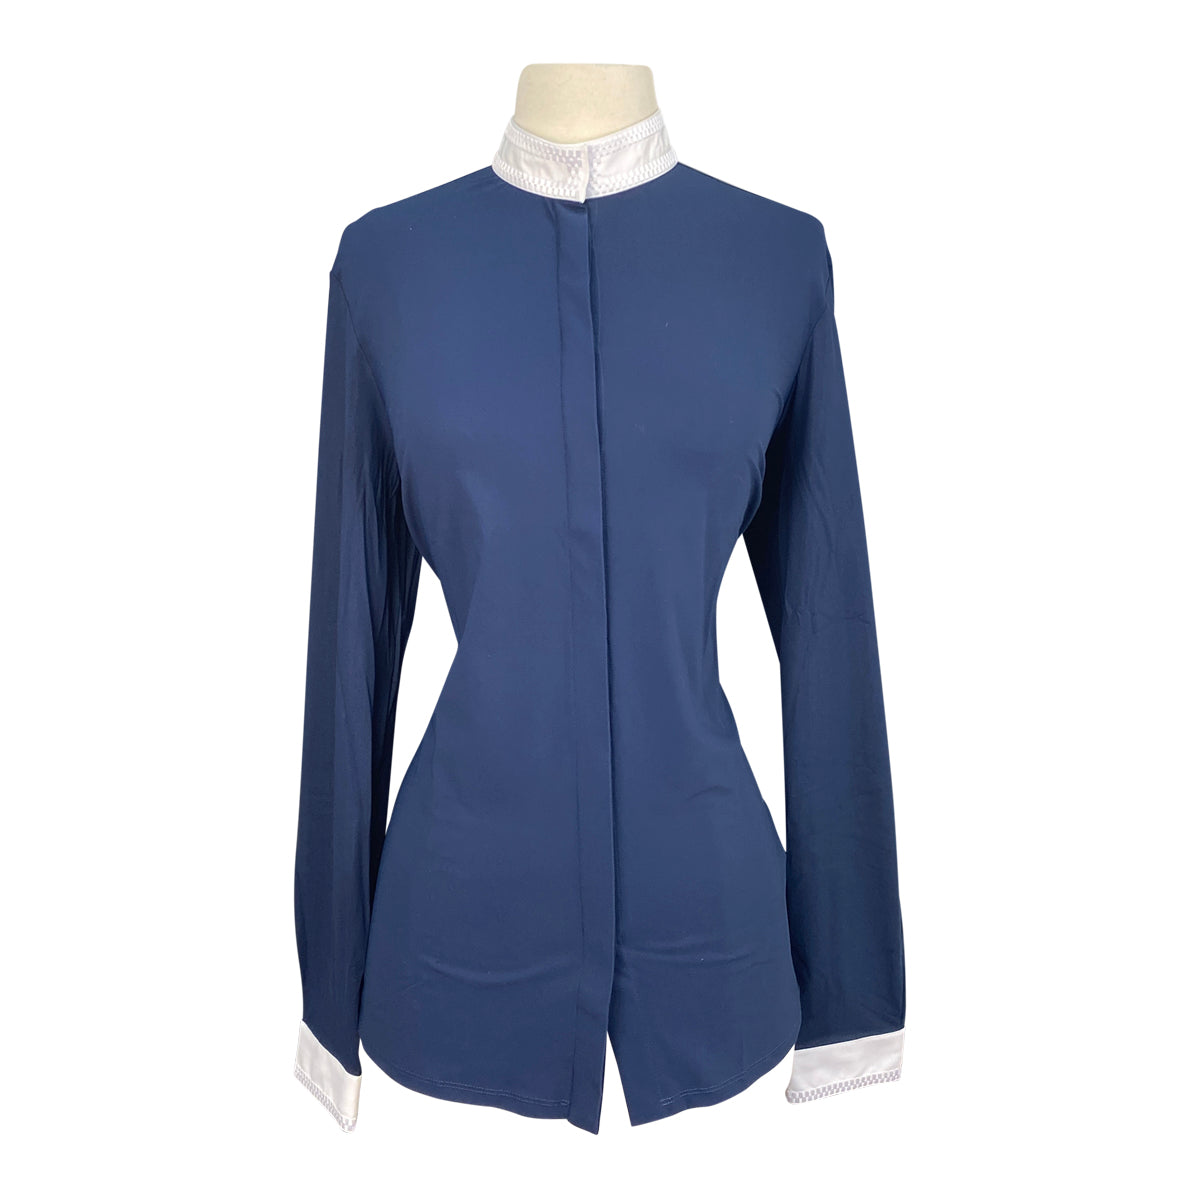 Cavalleria Toscana L/S Jersey &#39;Elegant Embroidery&#39; Competition Shirt  in Ocean Blue